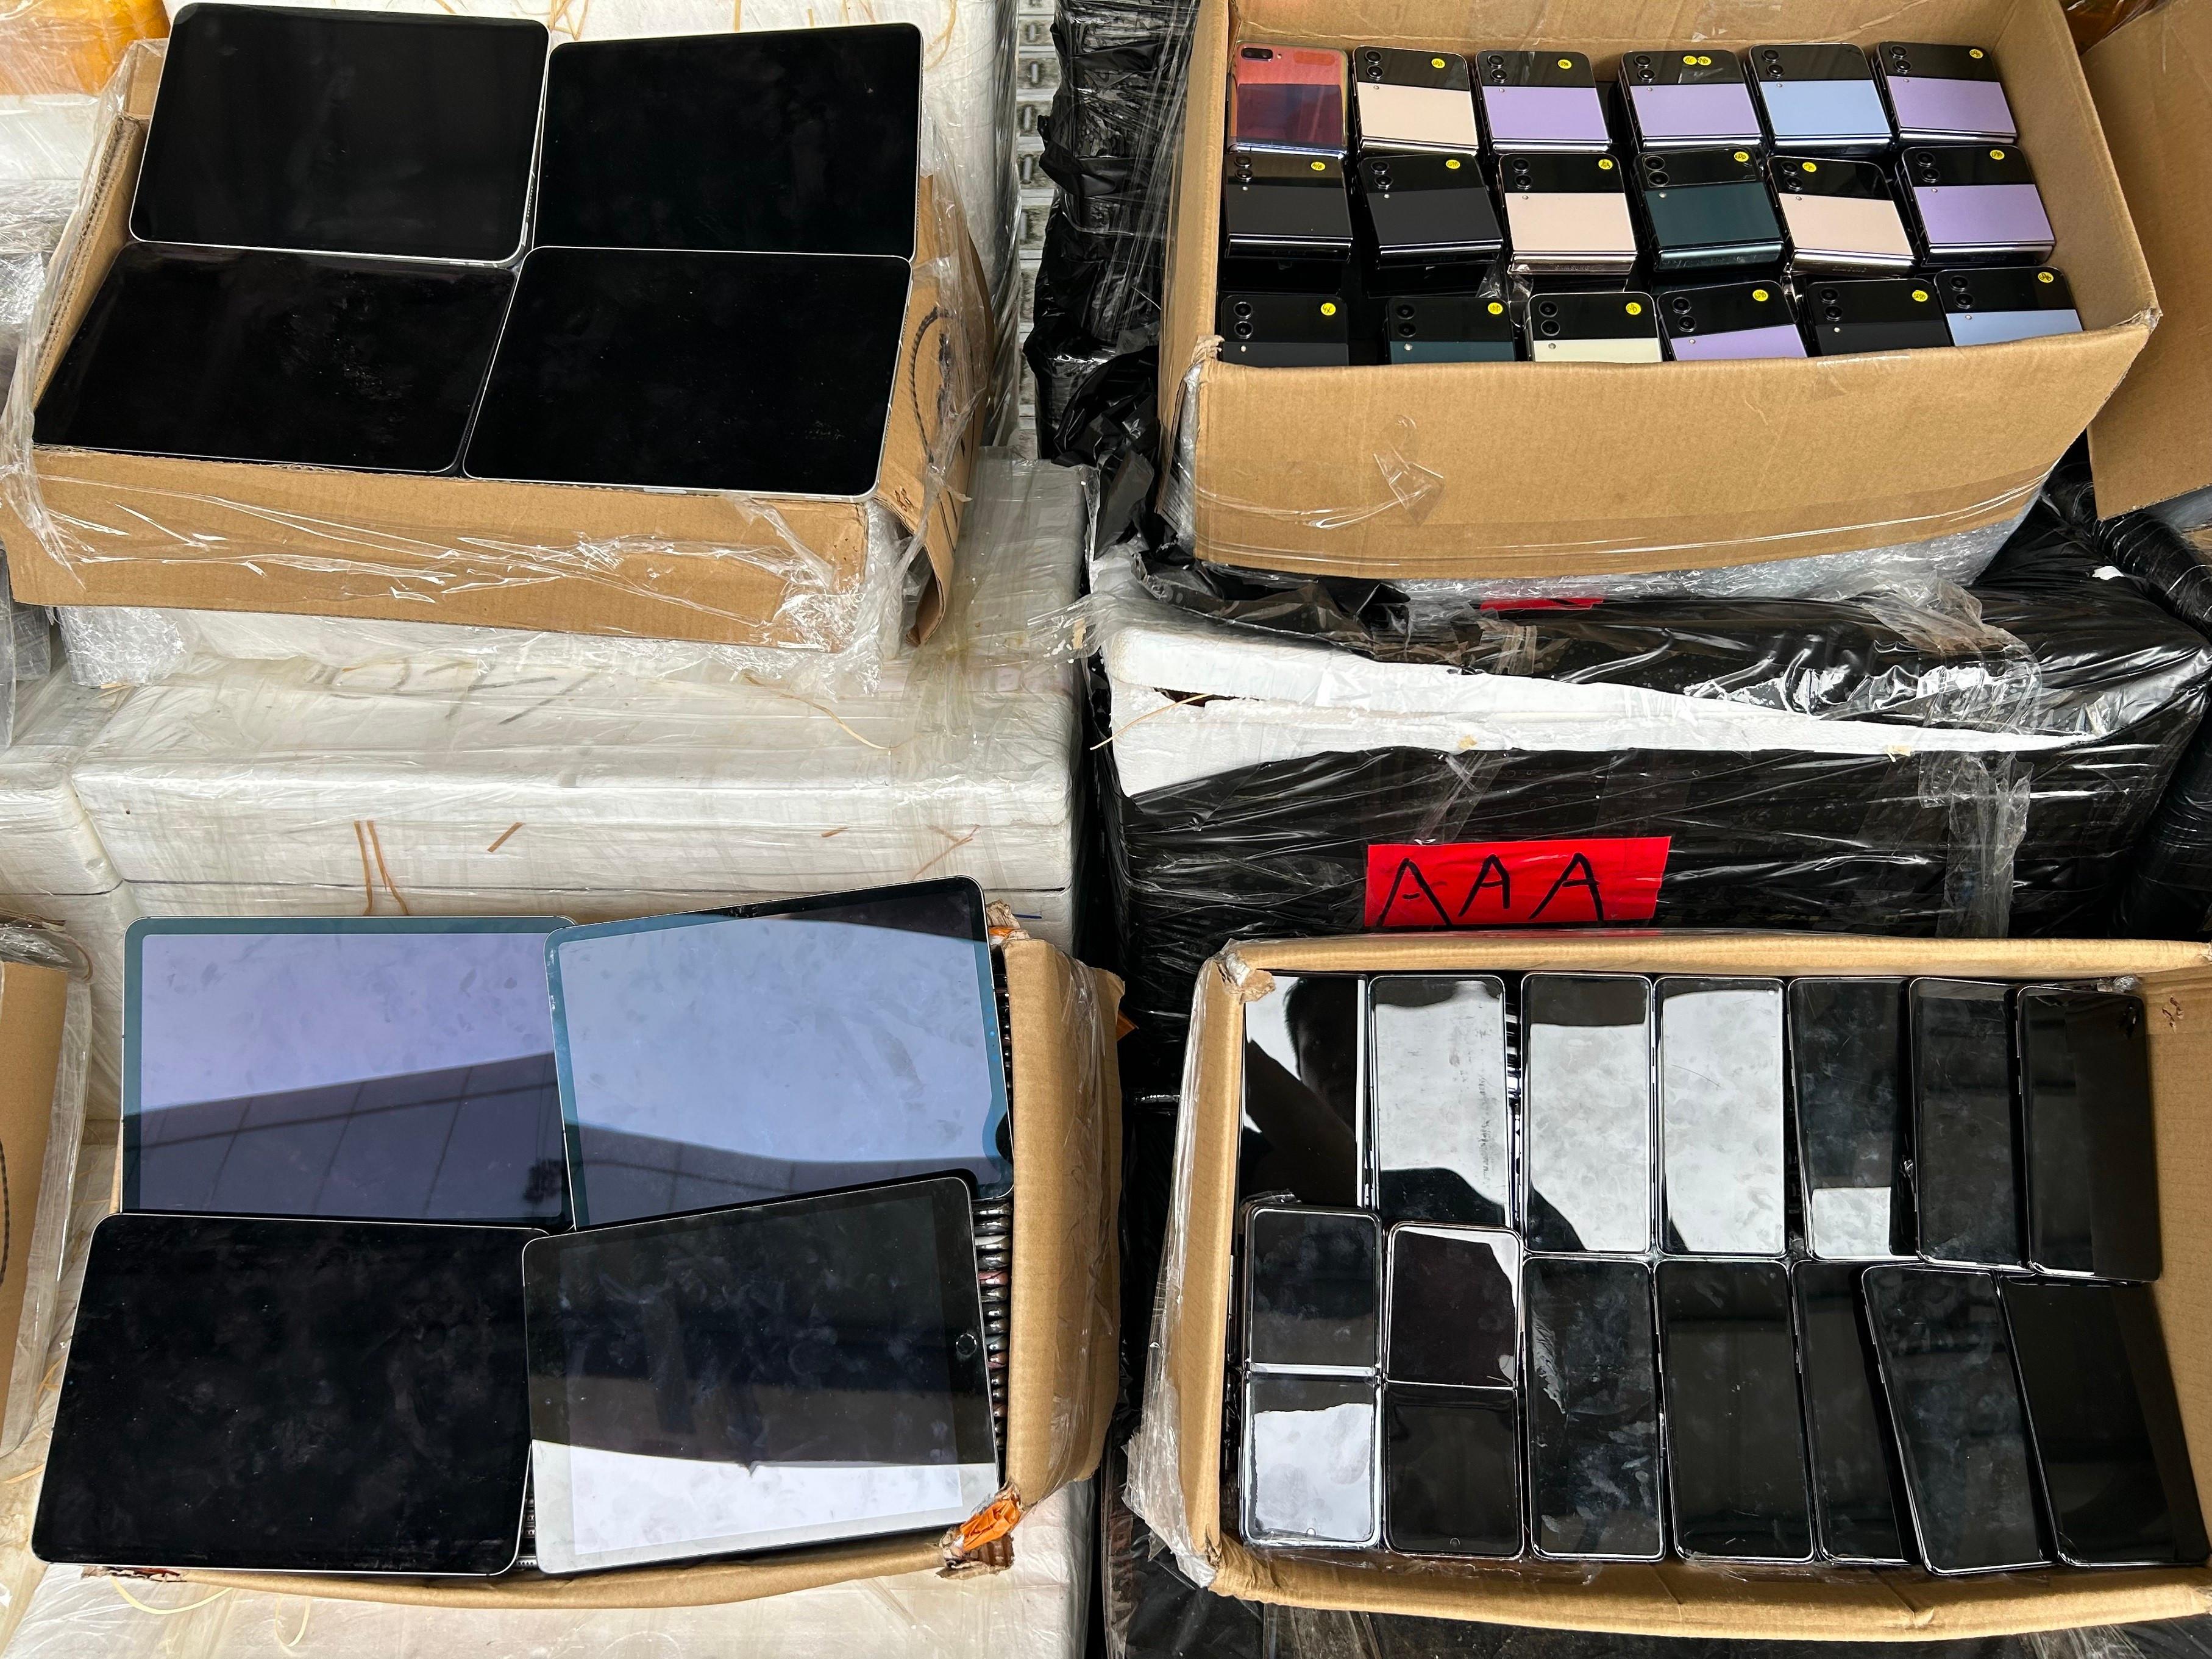 Hong Kong Customs yesterday (September 14) mounted an anti-smuggling operation in the Aberdeen Wholesale Fish Market and detected a suspected smuggling case involving a speedboat. A batch of suspected smuggled goods, with an estimated market value of about $11 million, was seized. Photo shows some of the suspected smuggled mobile phones and computer tablets seized.